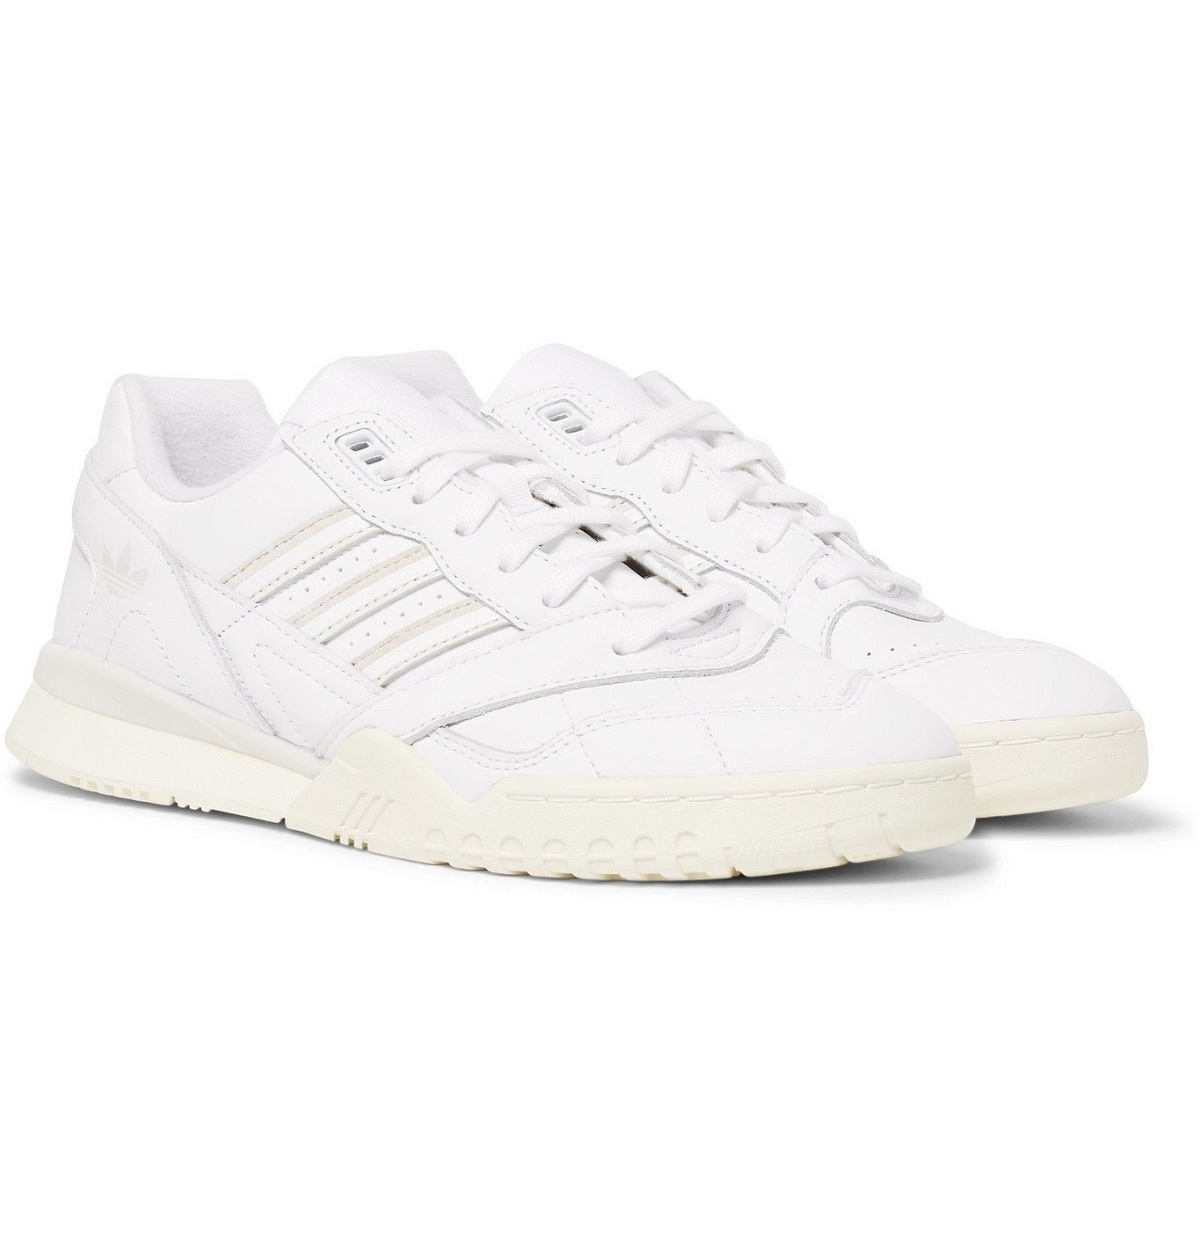 input Plakater Automatisering adidas Originals - A.R. Trainer Leather Sneakers - White adidas Originals  by Alexander Wang